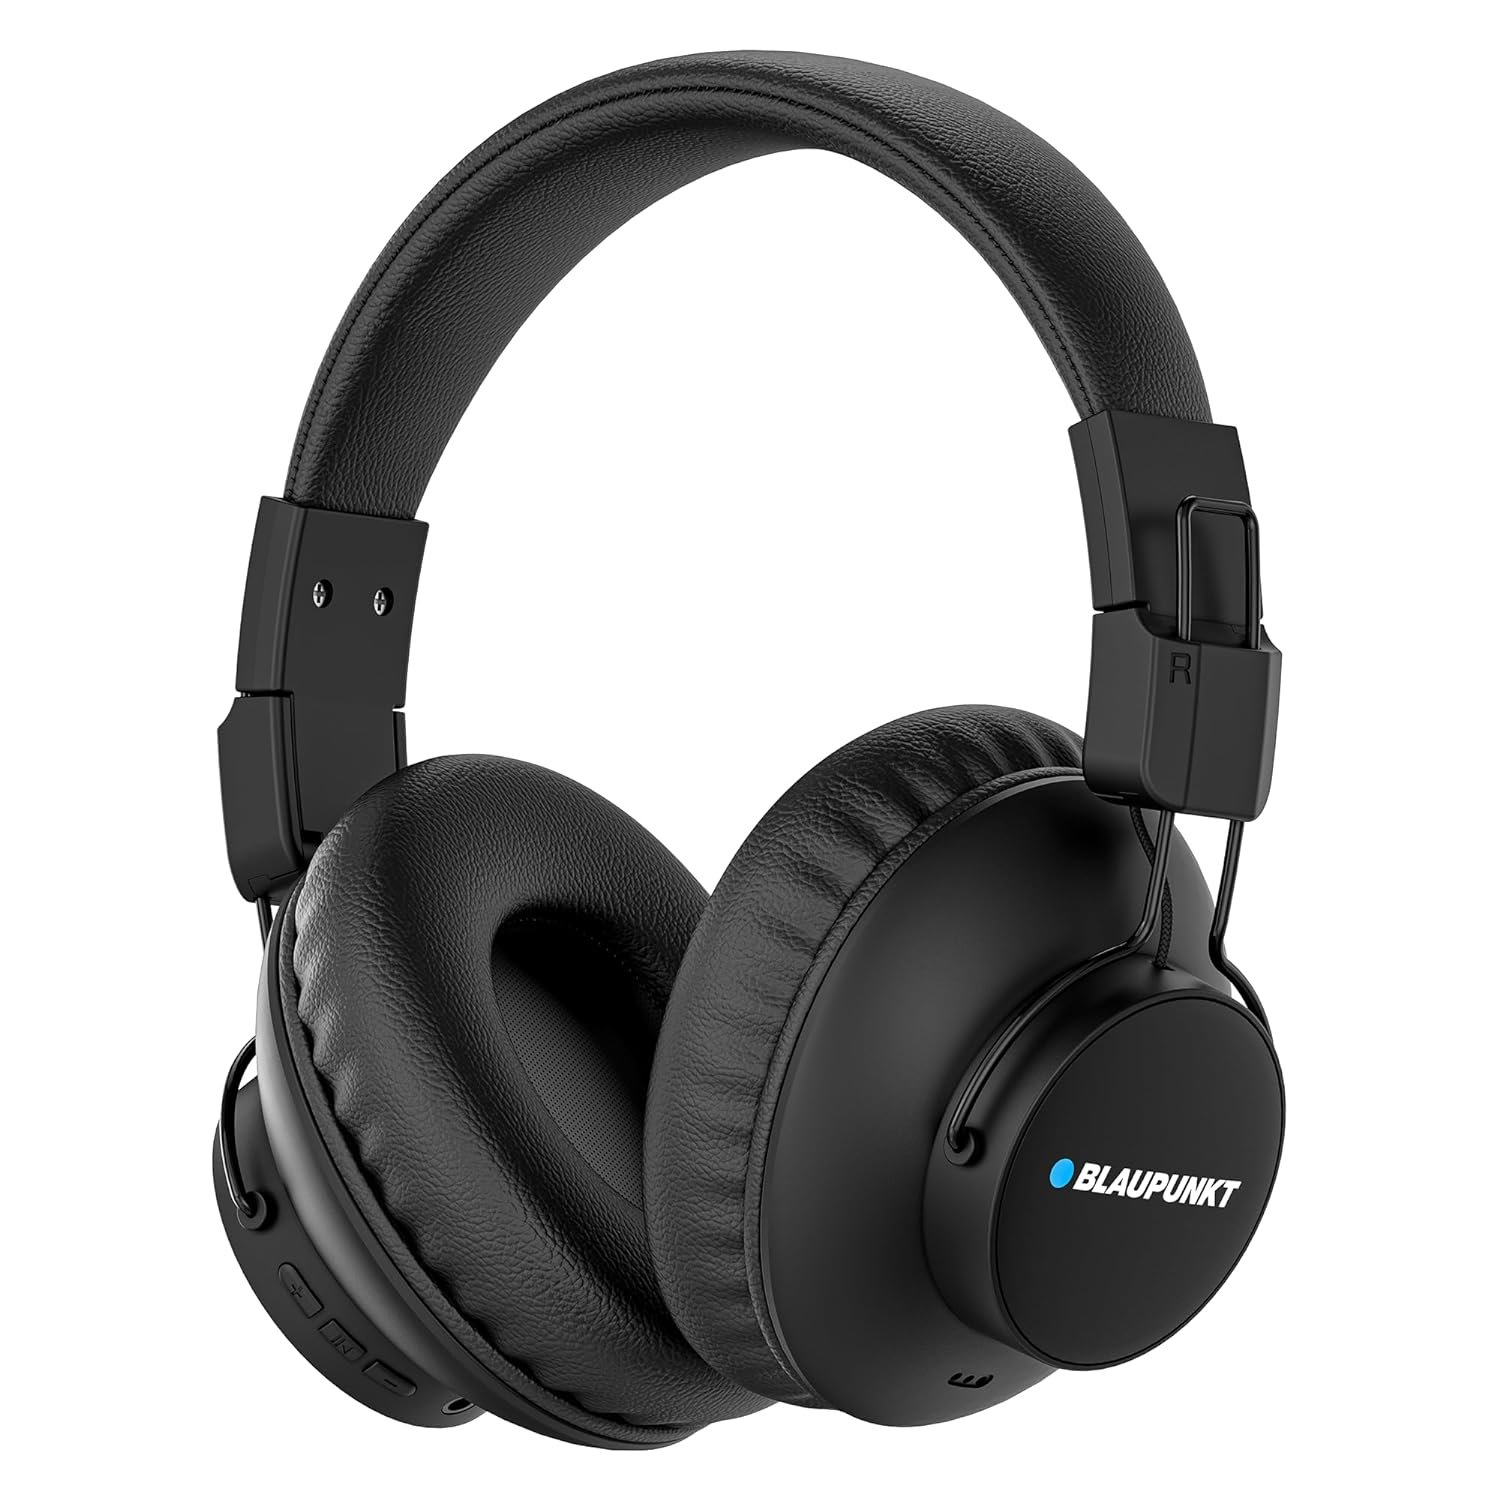 Blaupunkt Newly Launched BH41 Bluetooth Wireless Over Ear Headphones I Long Playtime I 40MM Drivers I Foldable I Flexible & Light Weight I Built in Mic I TurboVolt Fast Charging